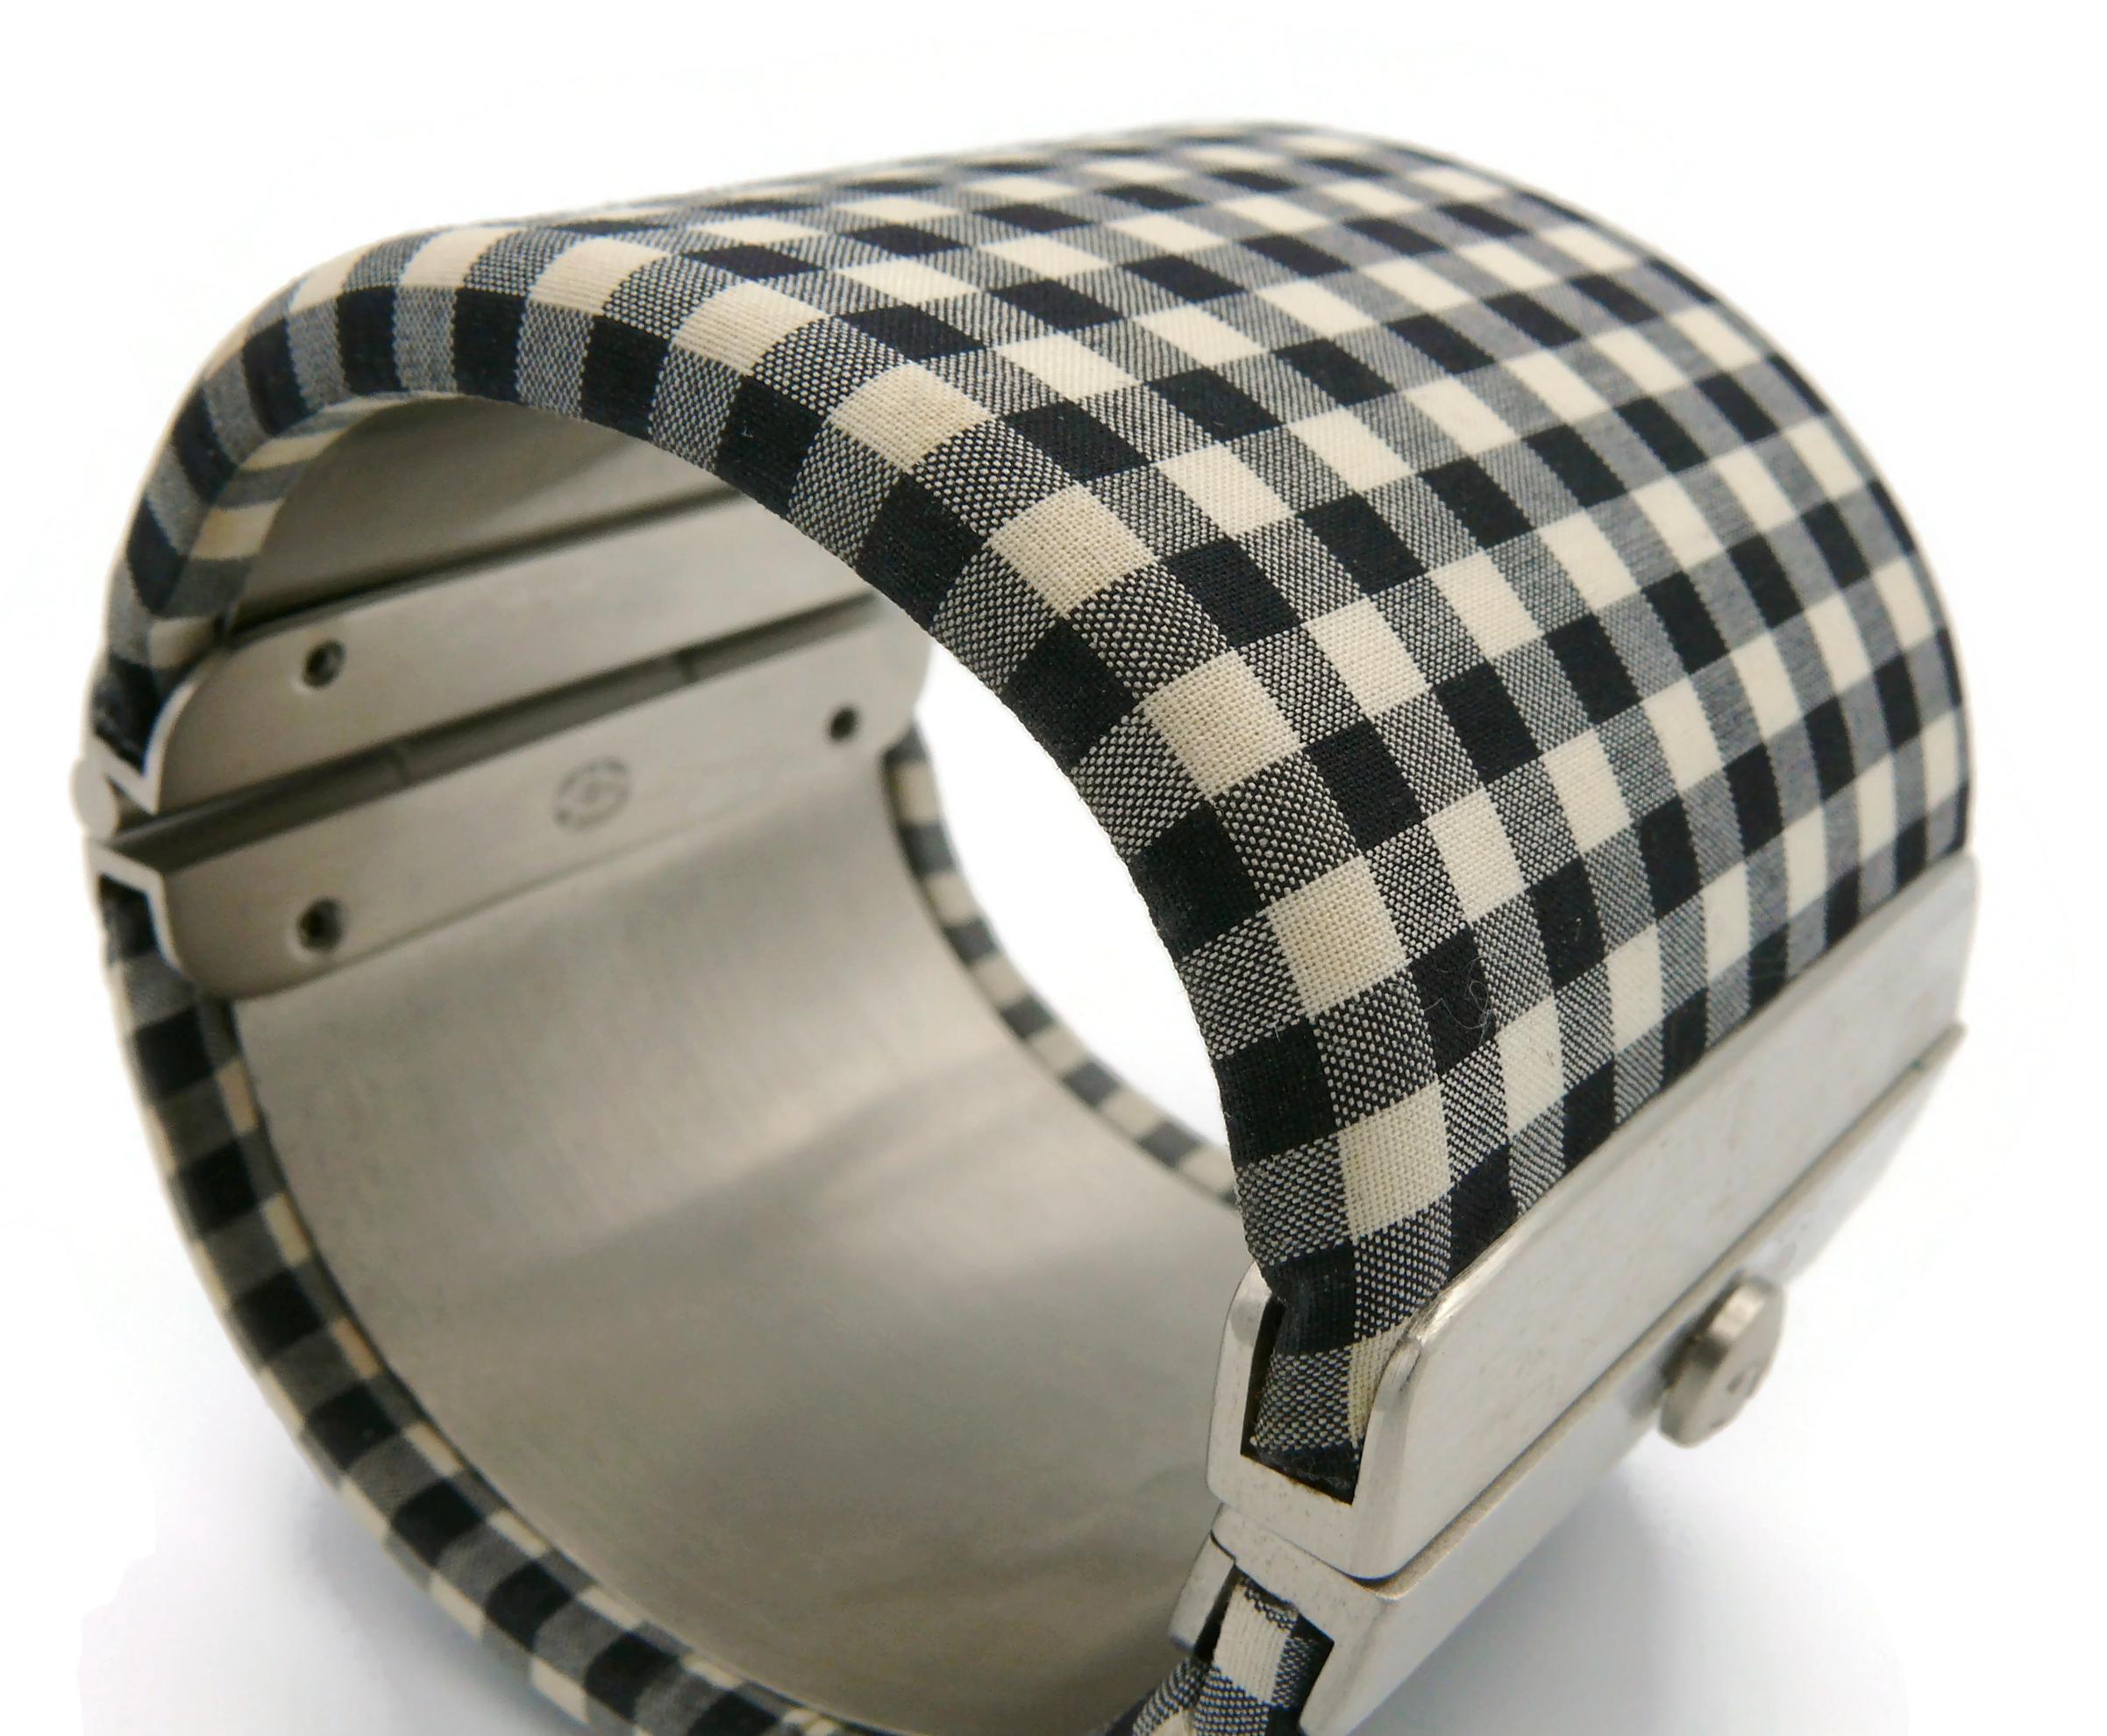 CHANEL Black and White Gingham Vichy Print Cuff Bracelet, Resort Collection 2011 For Sale 13